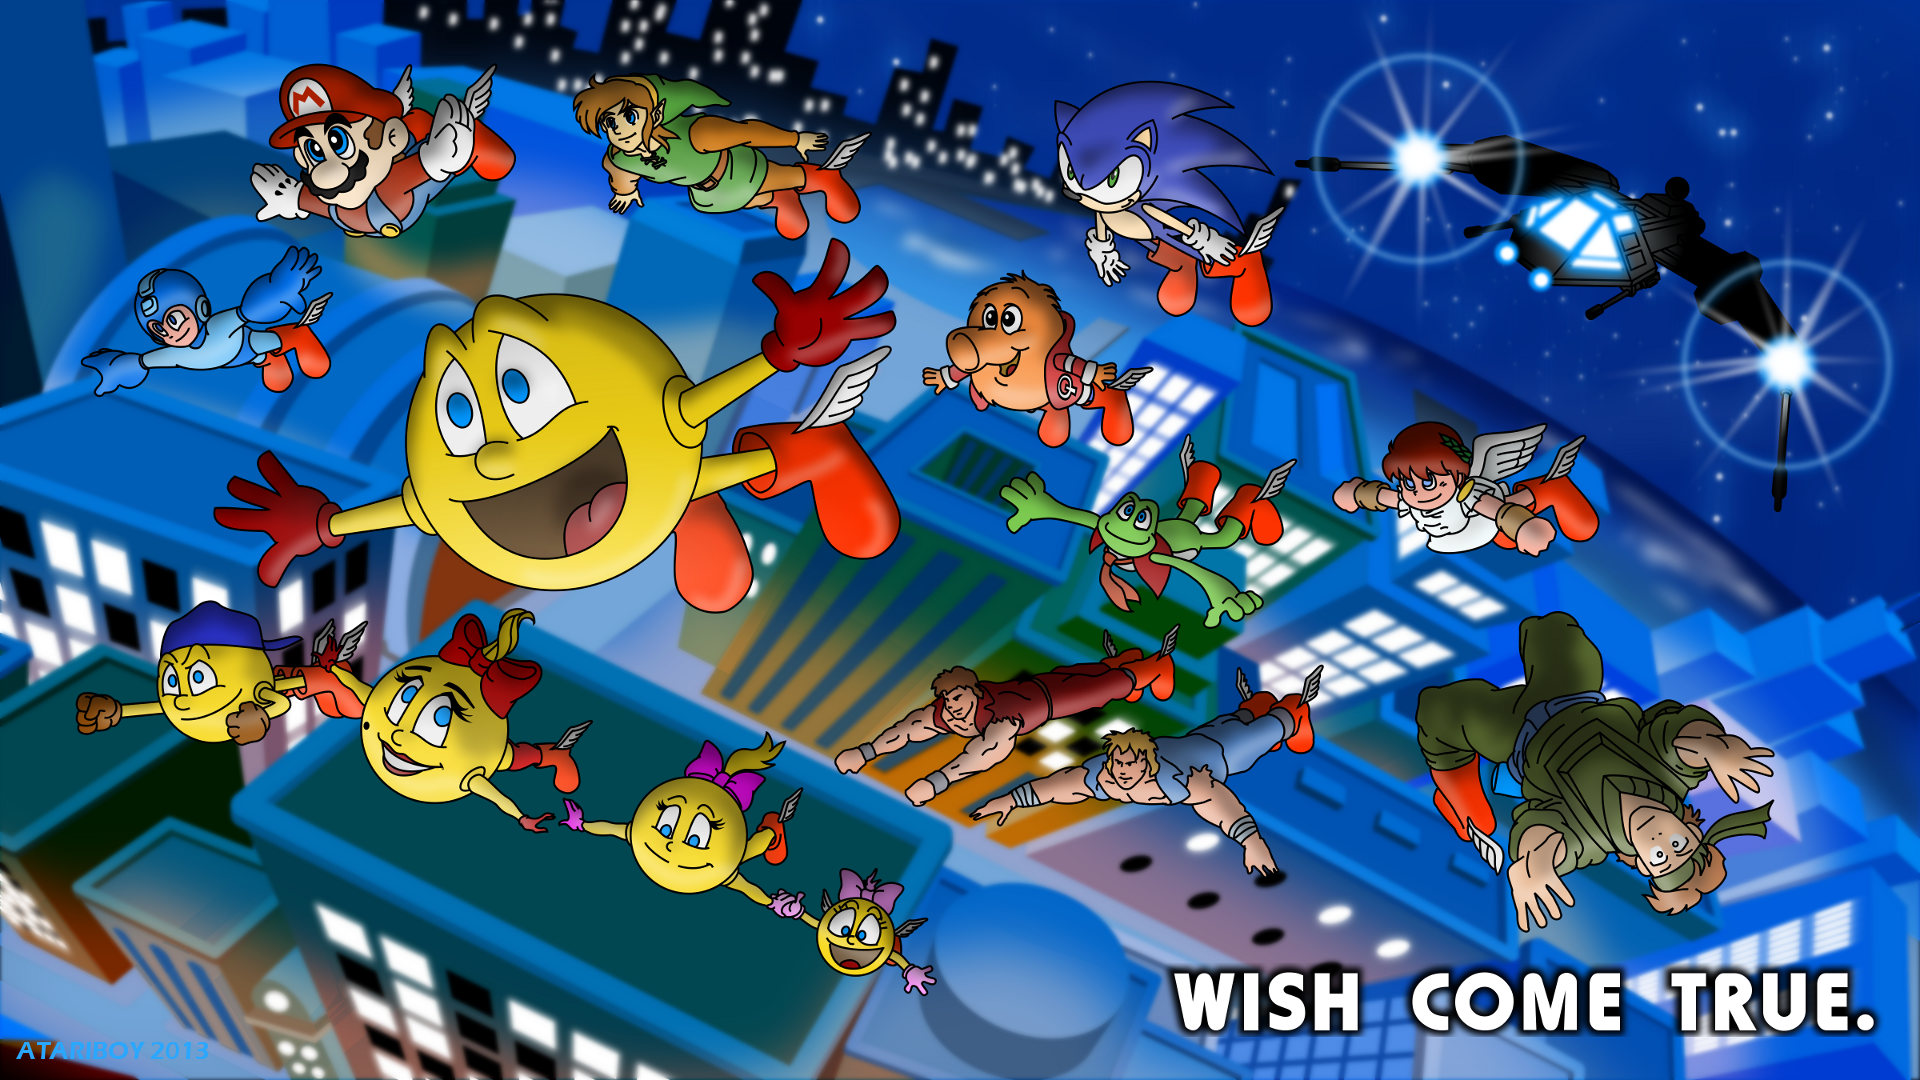 pacman_fanfic___wish_come_true__by_atari